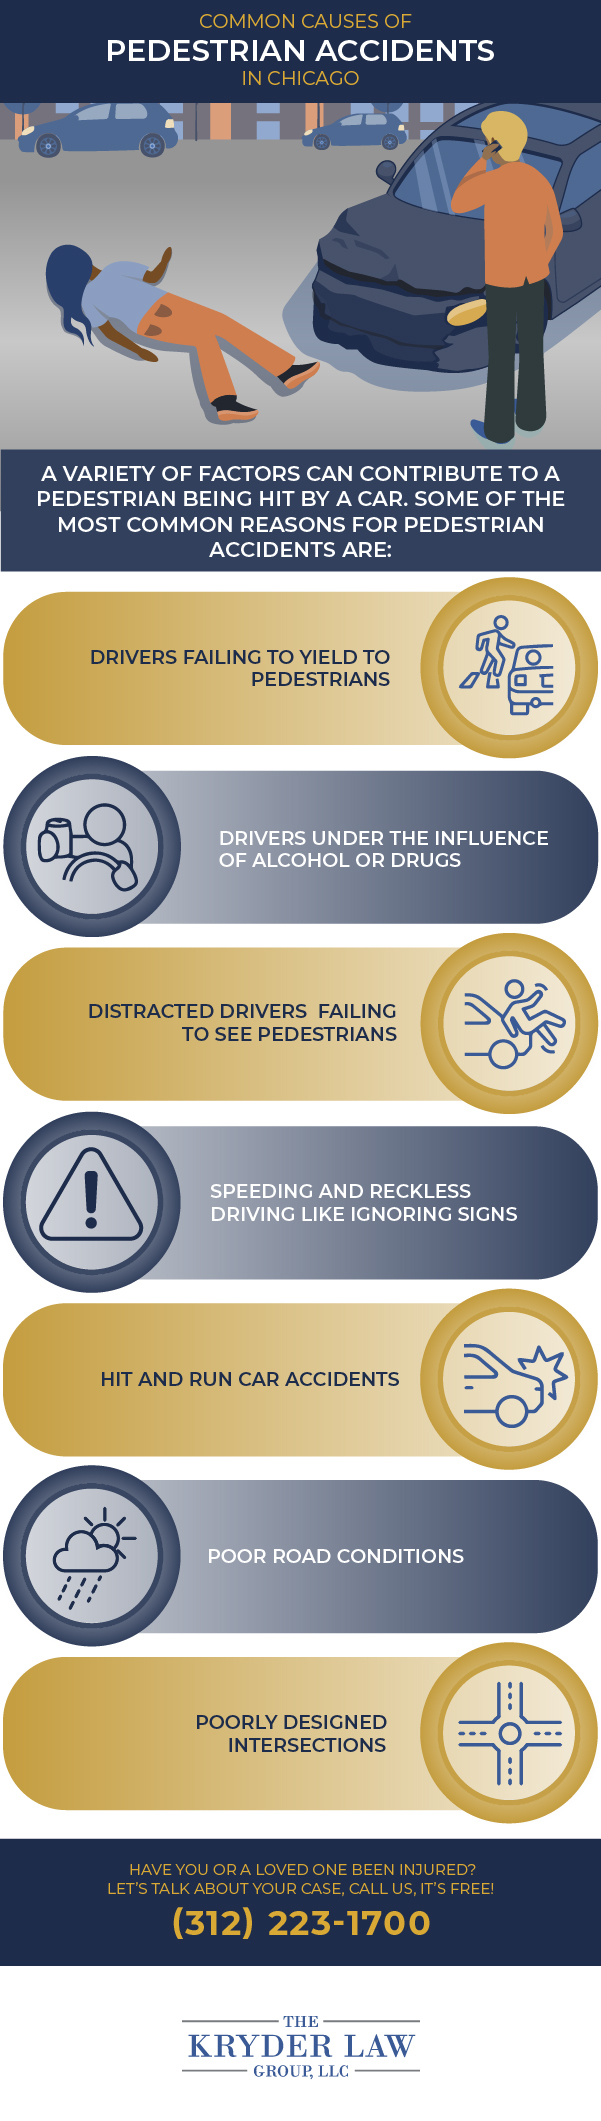 Common Causes of Pedestrian Accidents in Chicago